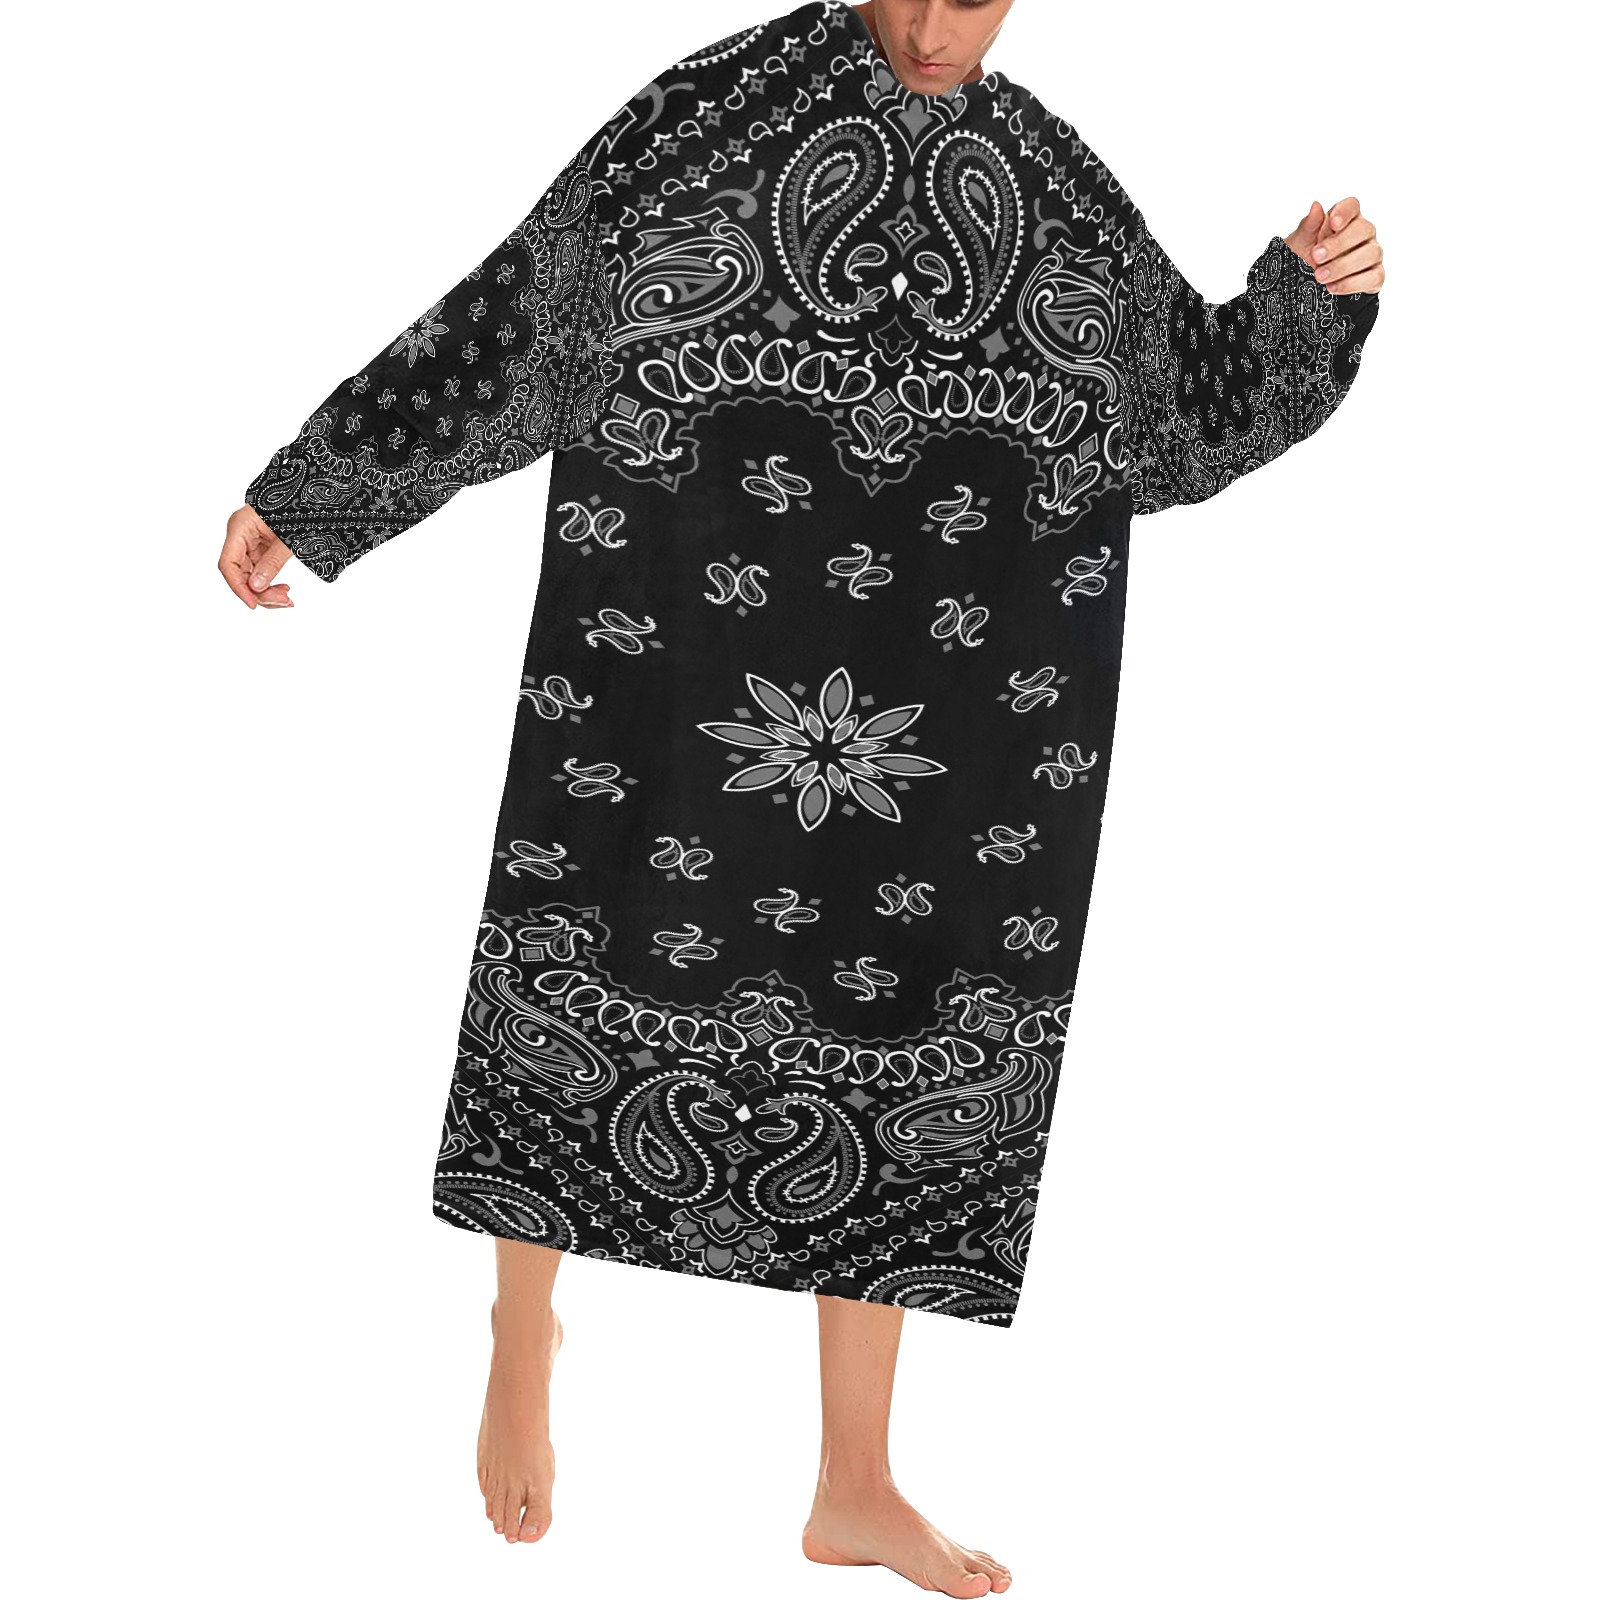 Black Bandanna Pattern Blanket Robe with Sleeves for Adults